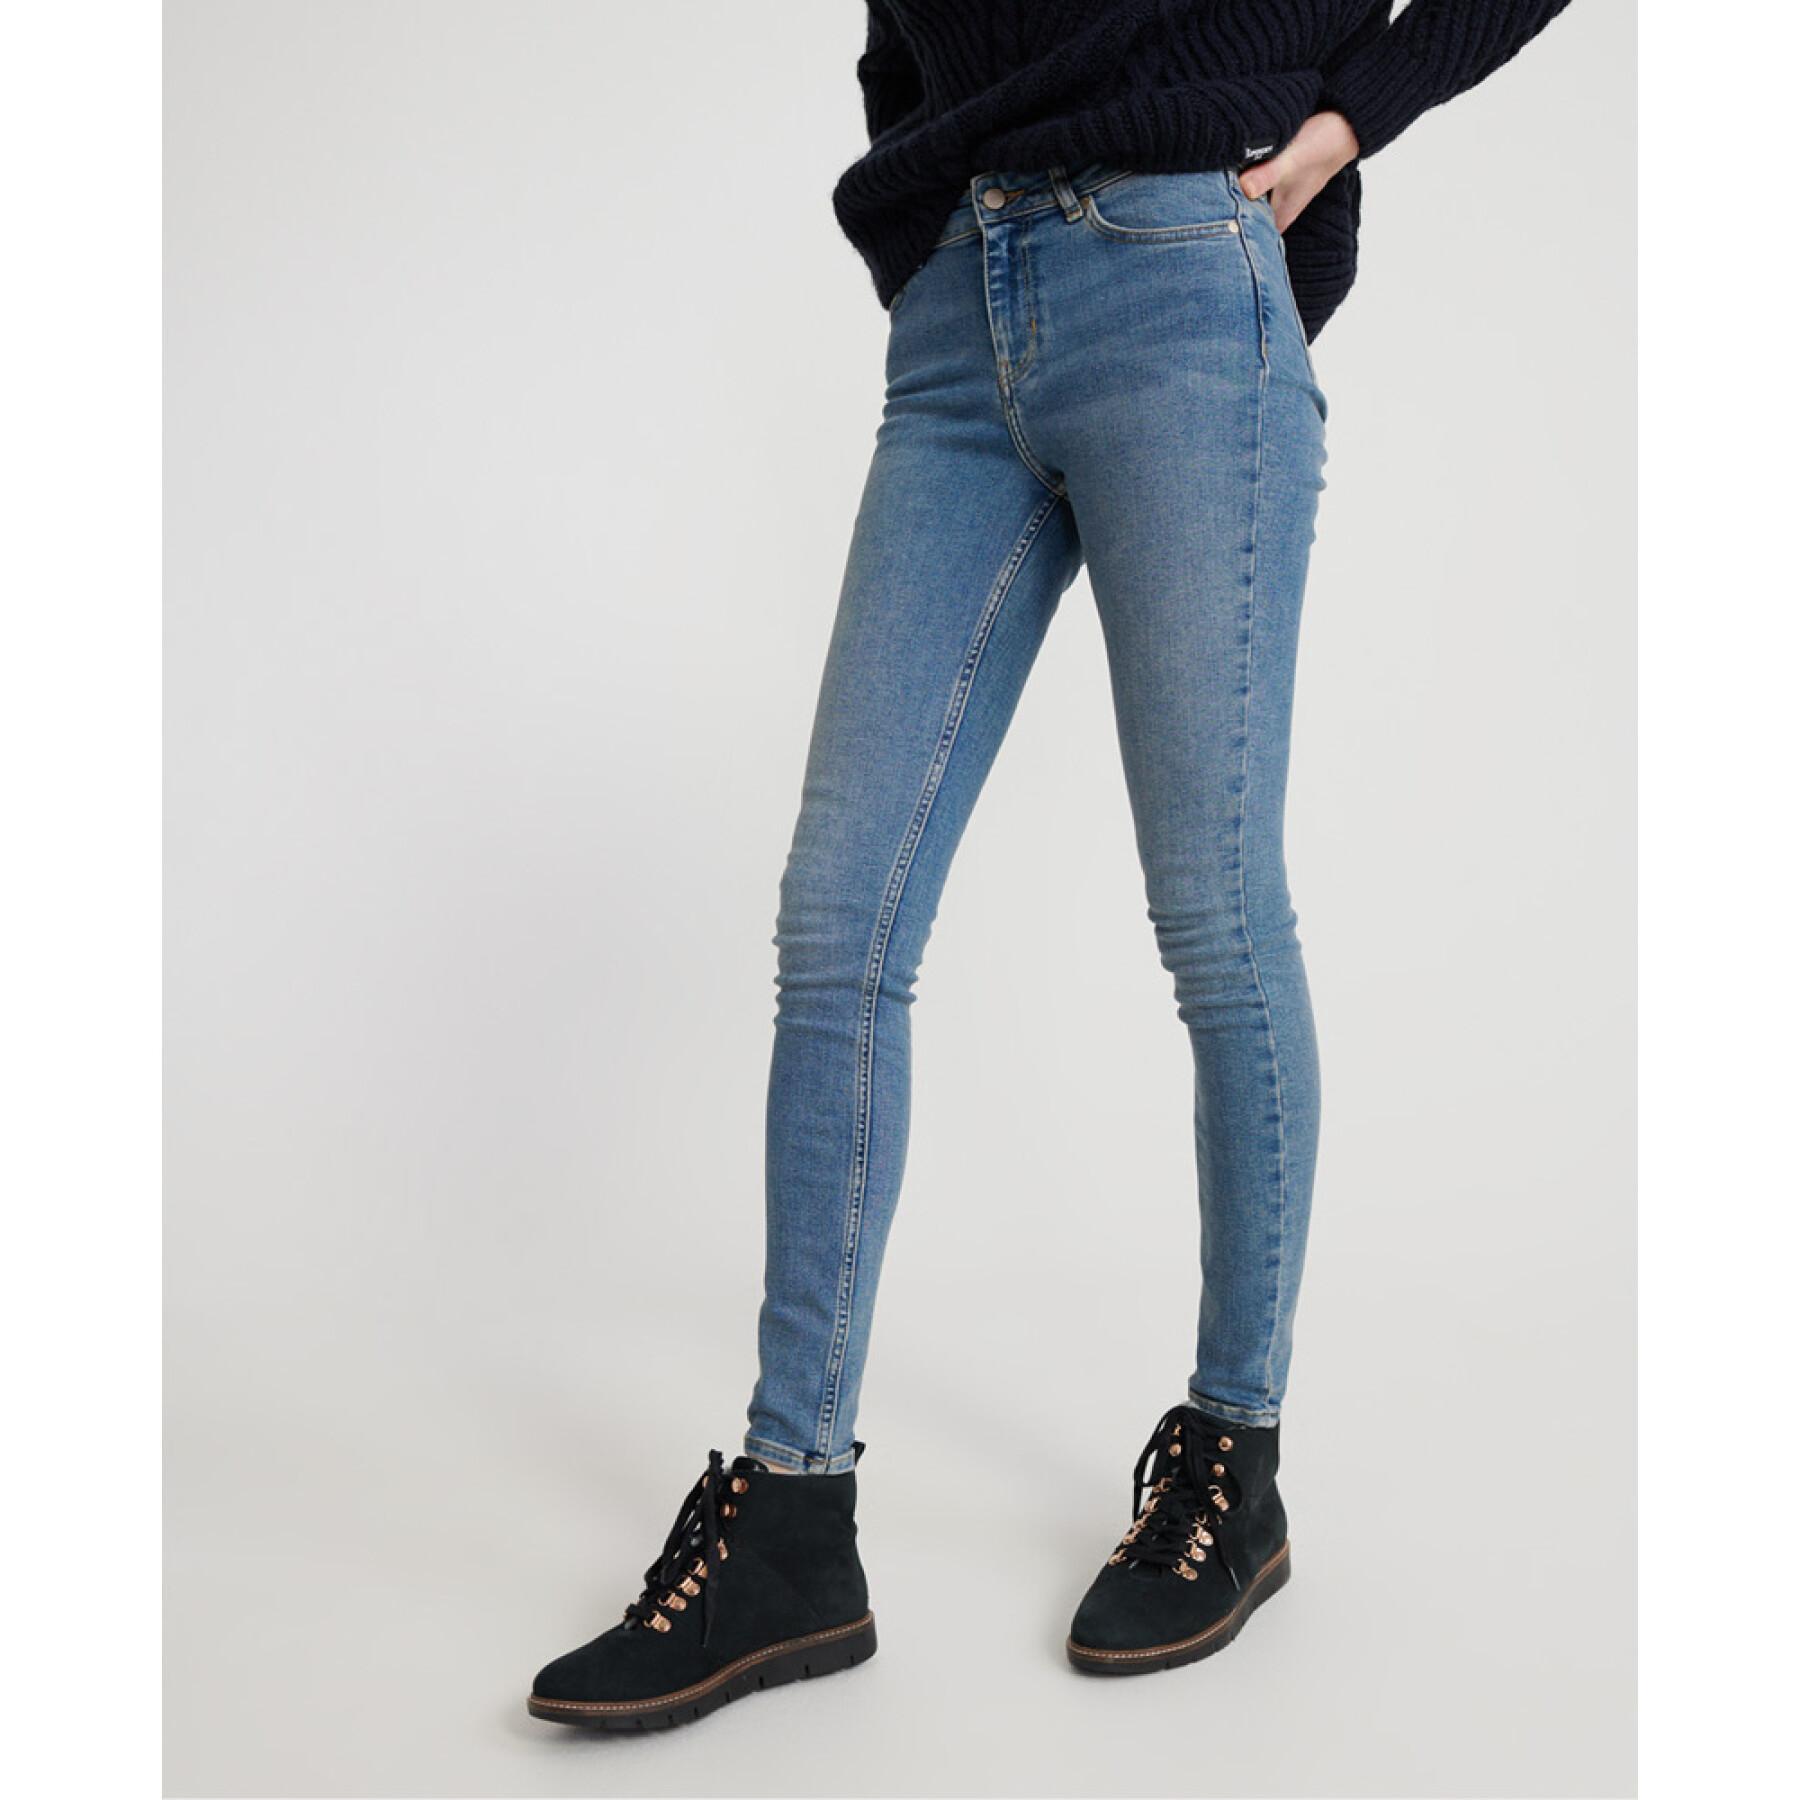 Women's mid-rise skinny jeans Superdry Super Crafted